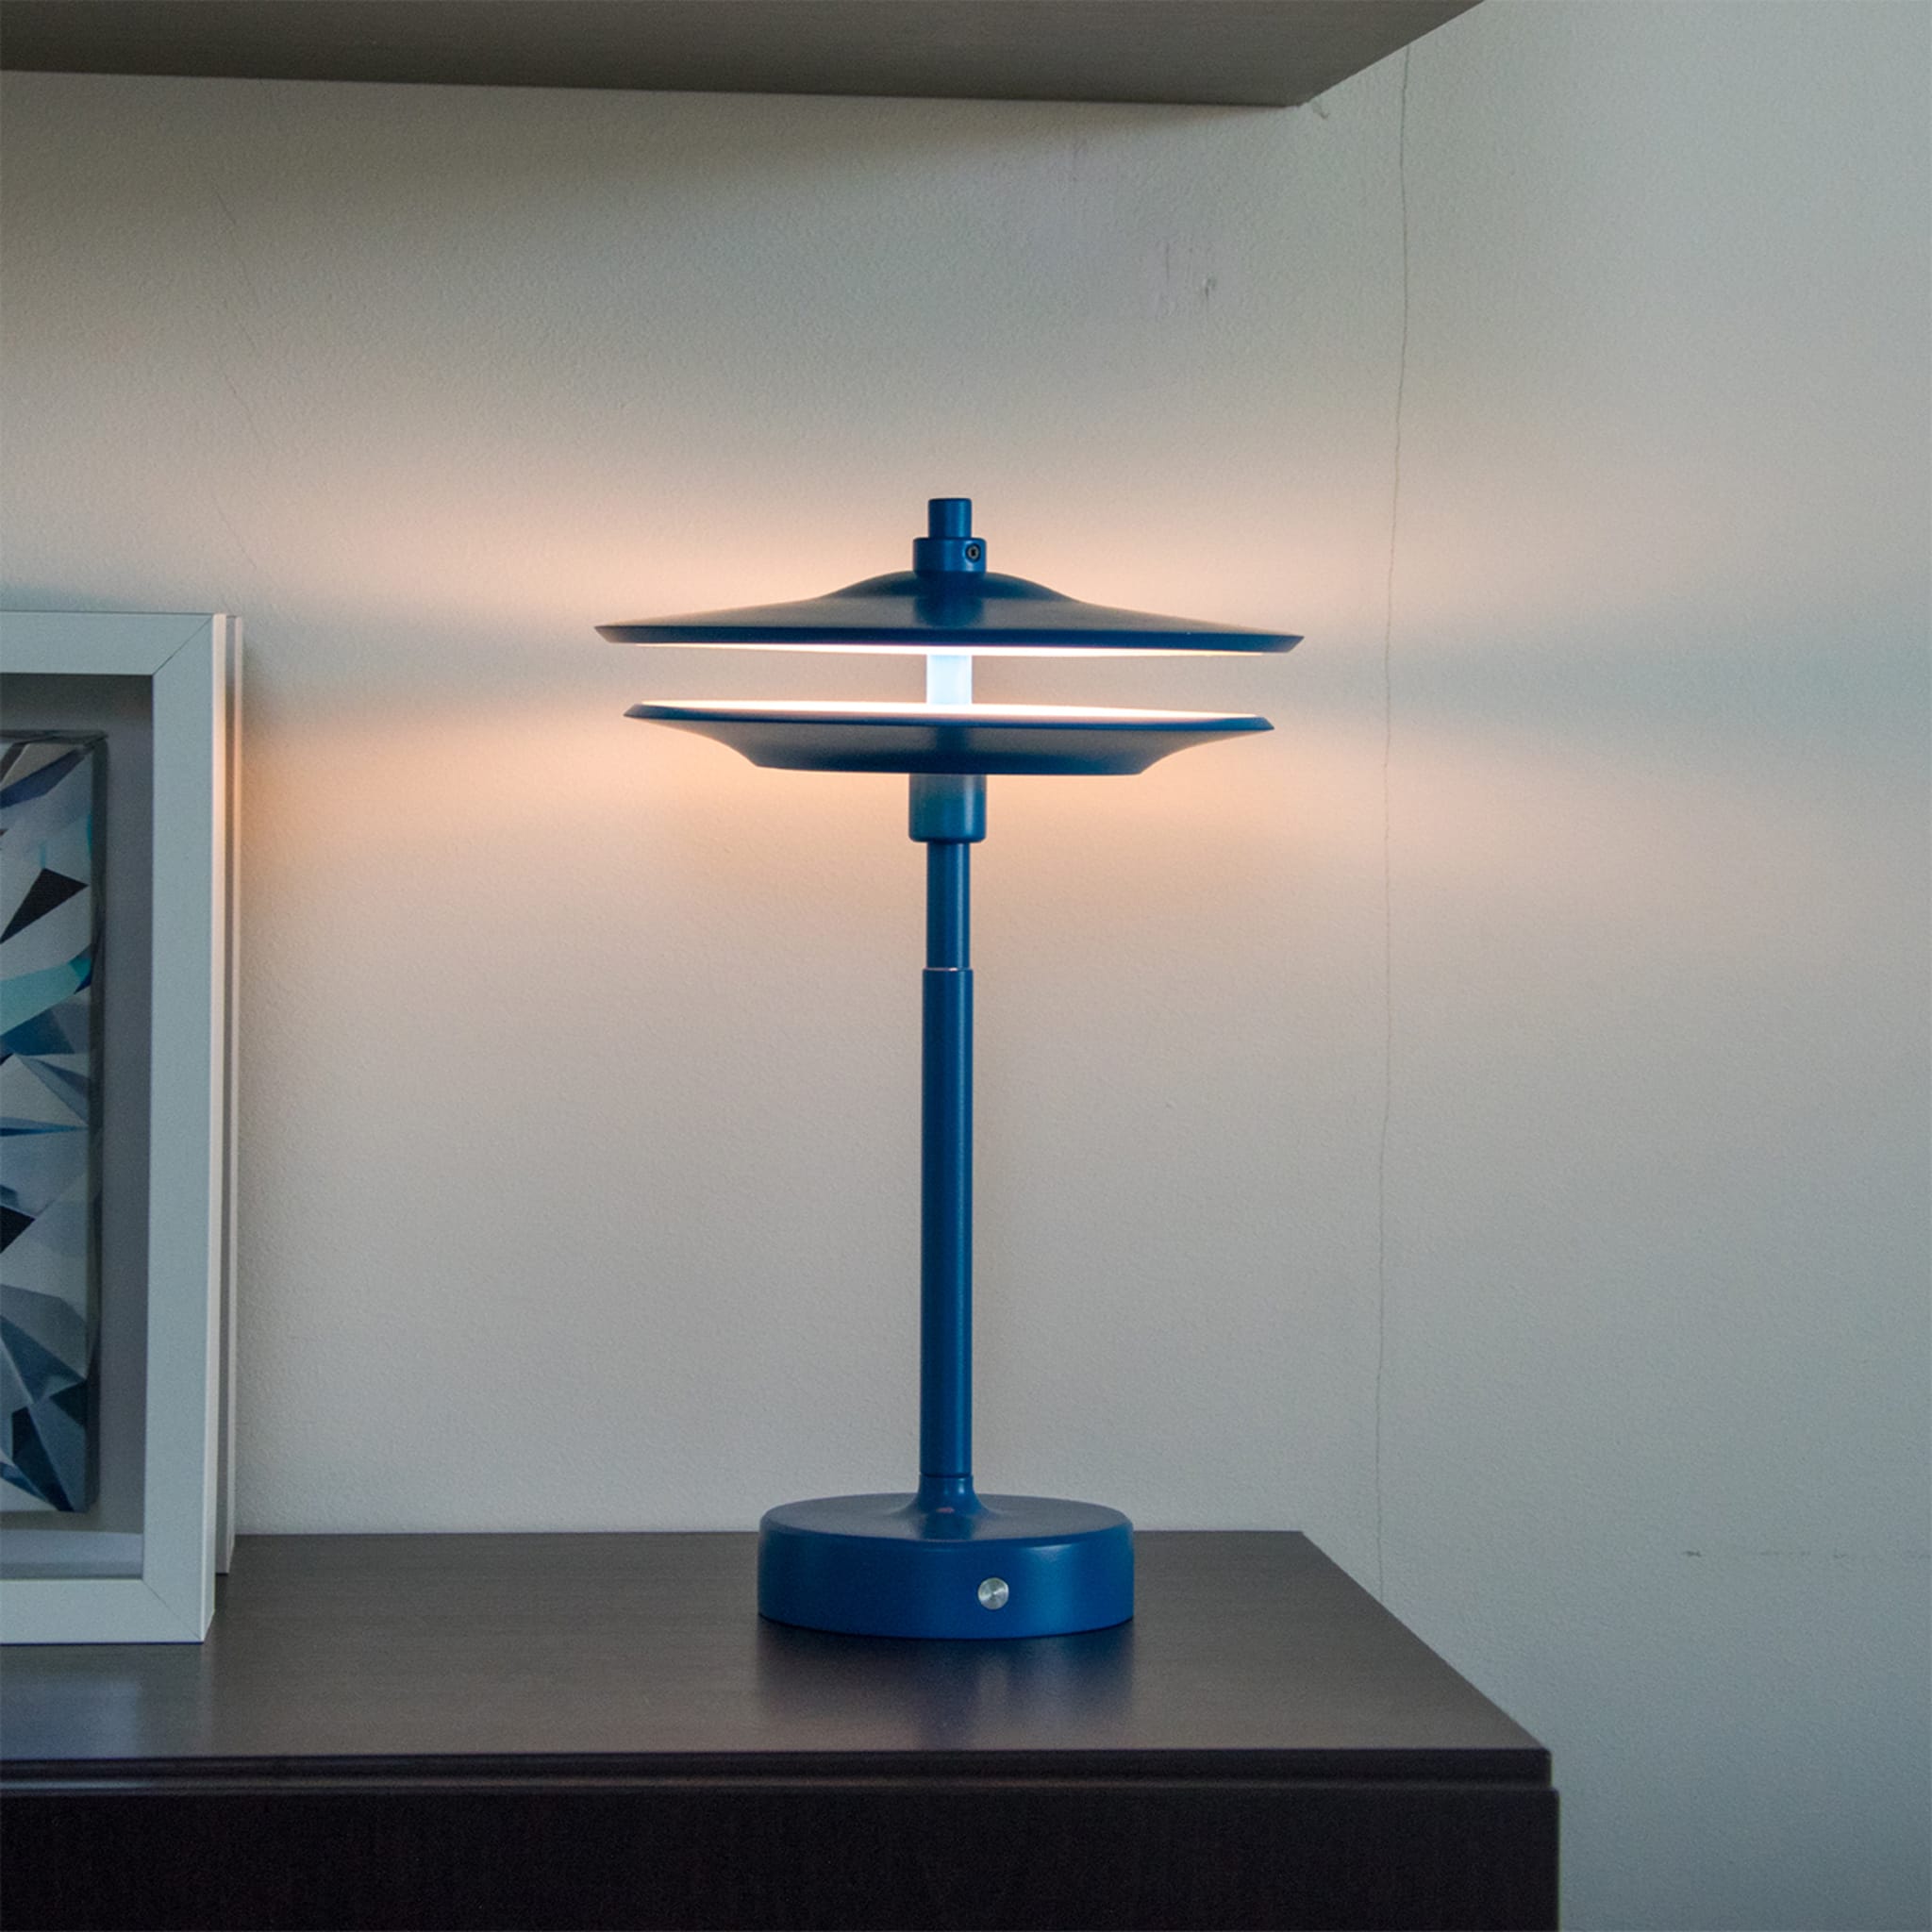 Drum Blue Rechargeable Table Lamp by Albore Design - Alternative view 1